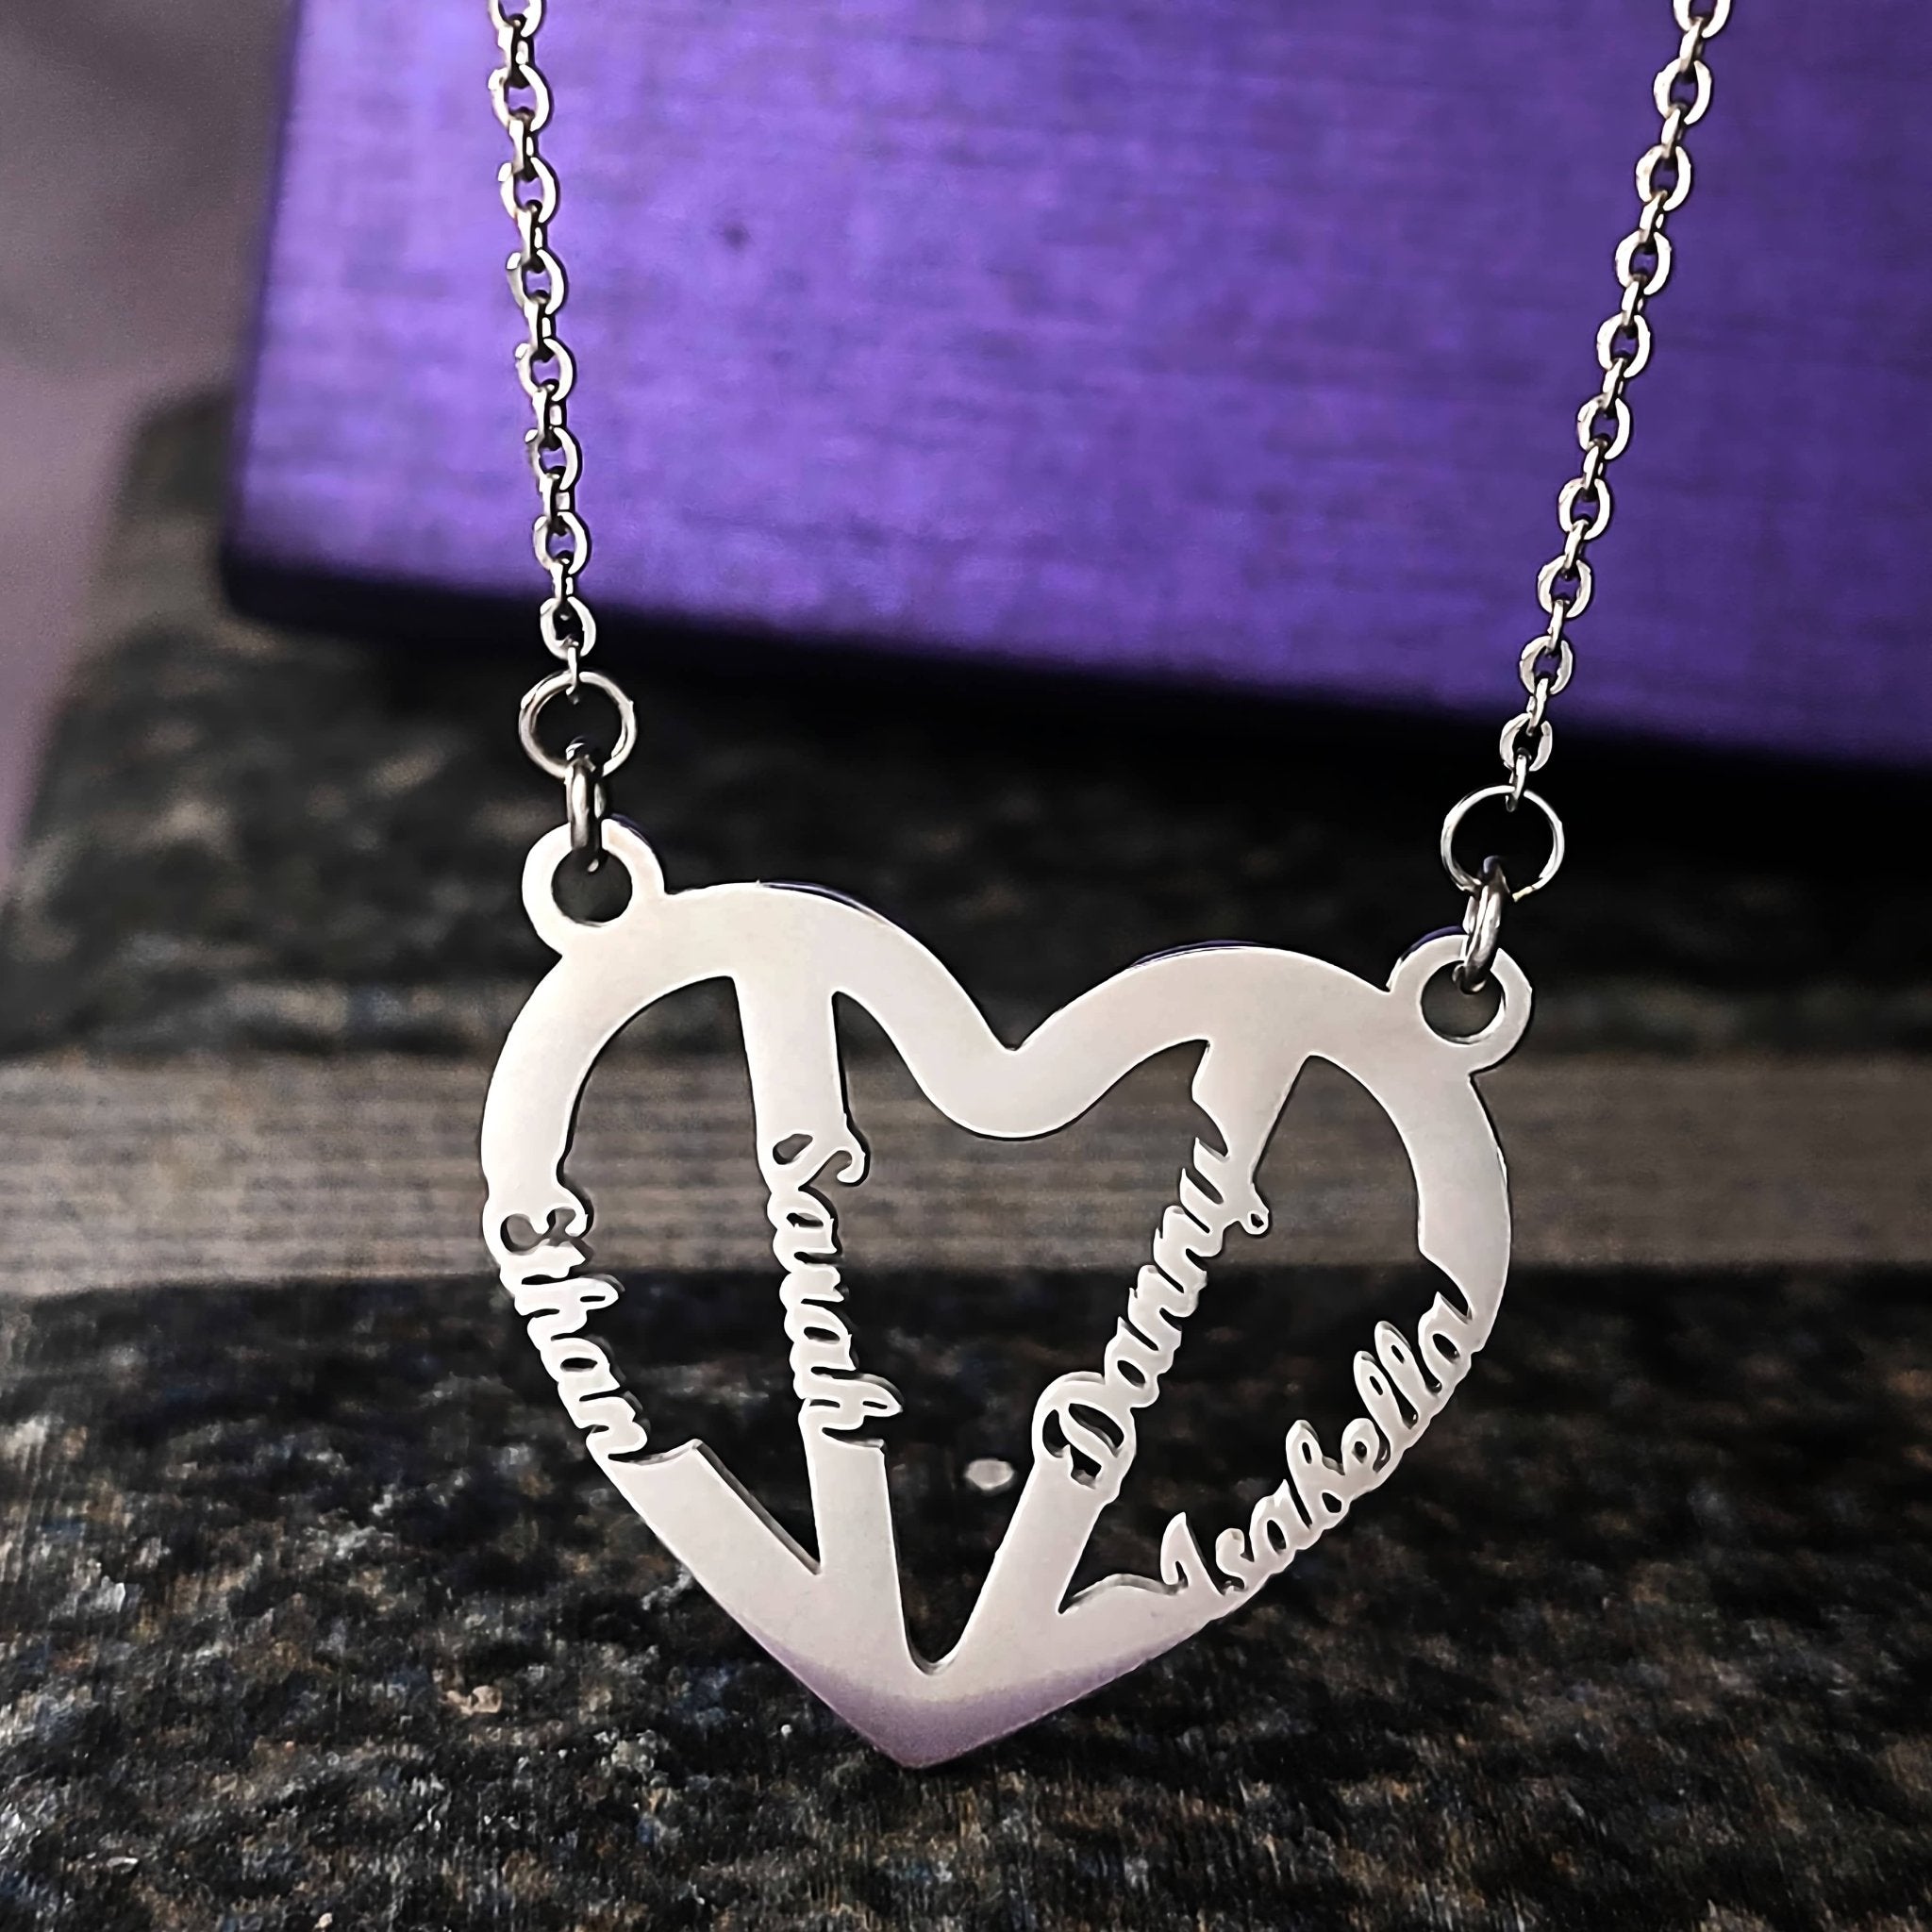 In My Heart Name Necklace (Birthstones Optional) - Name Necklaces by Belle Fever